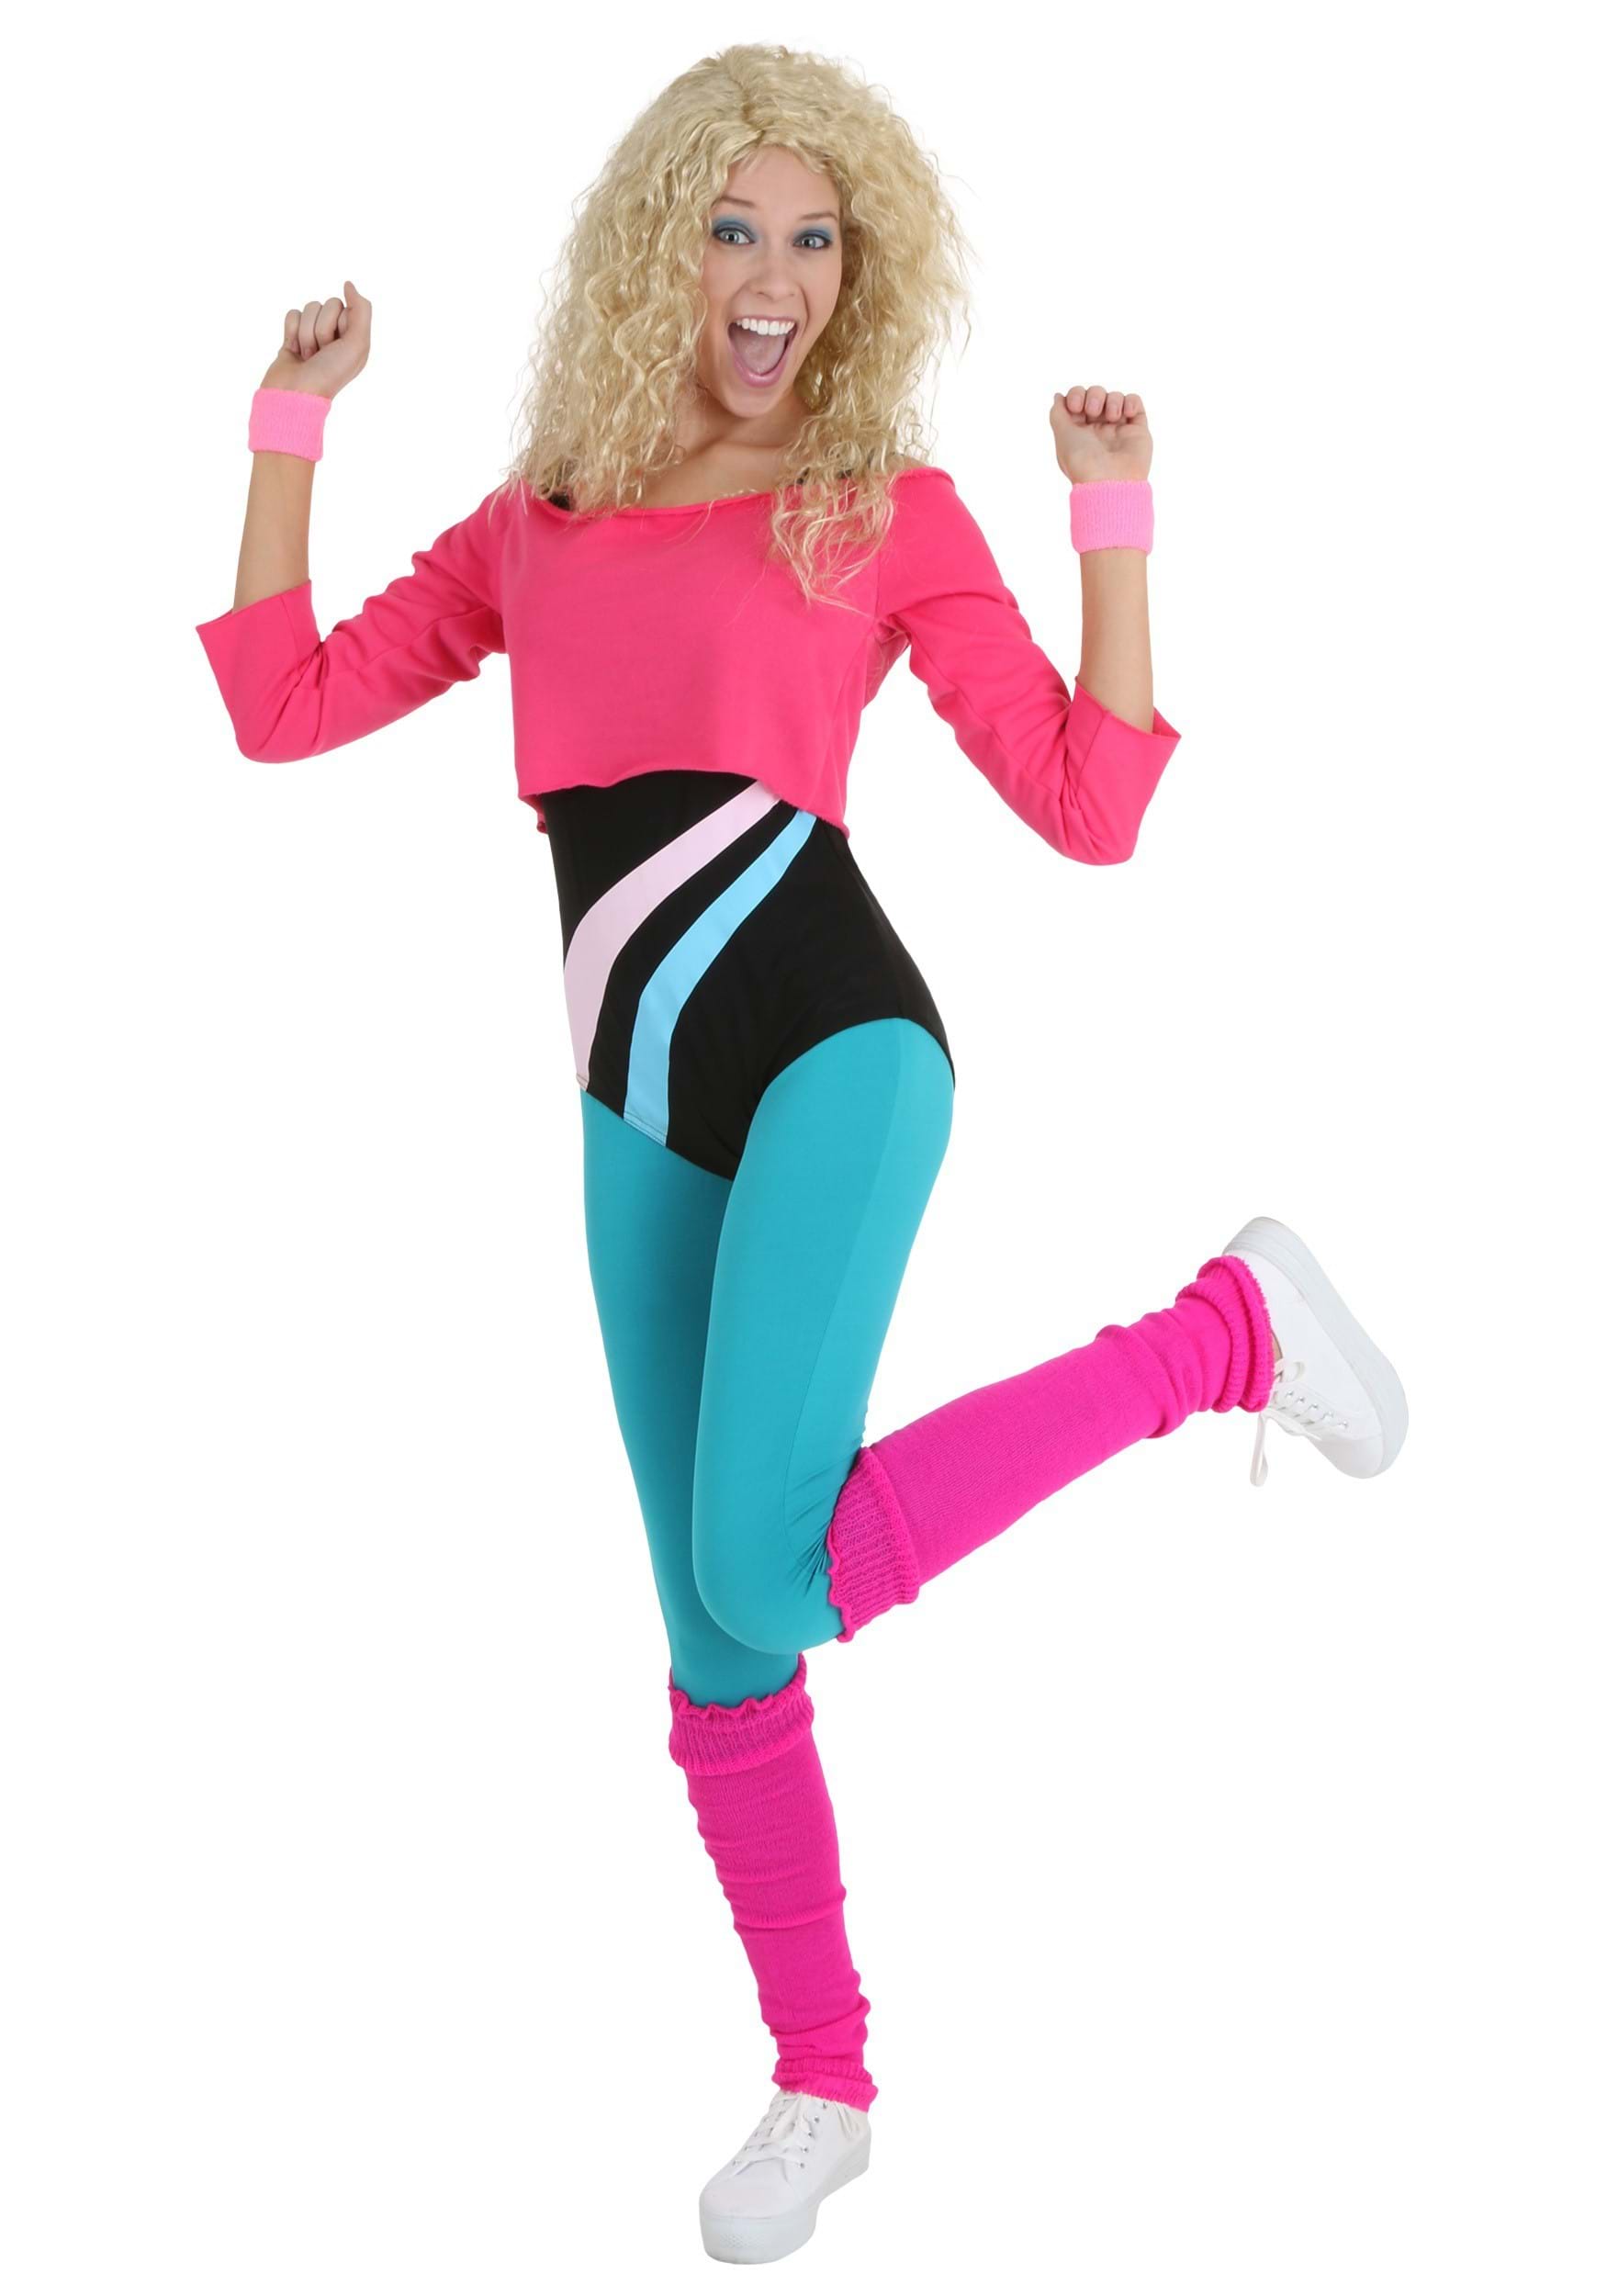 https://images.halloweencostumes.com/products/32876/1-1/womens-80s-workout-girl.jpg